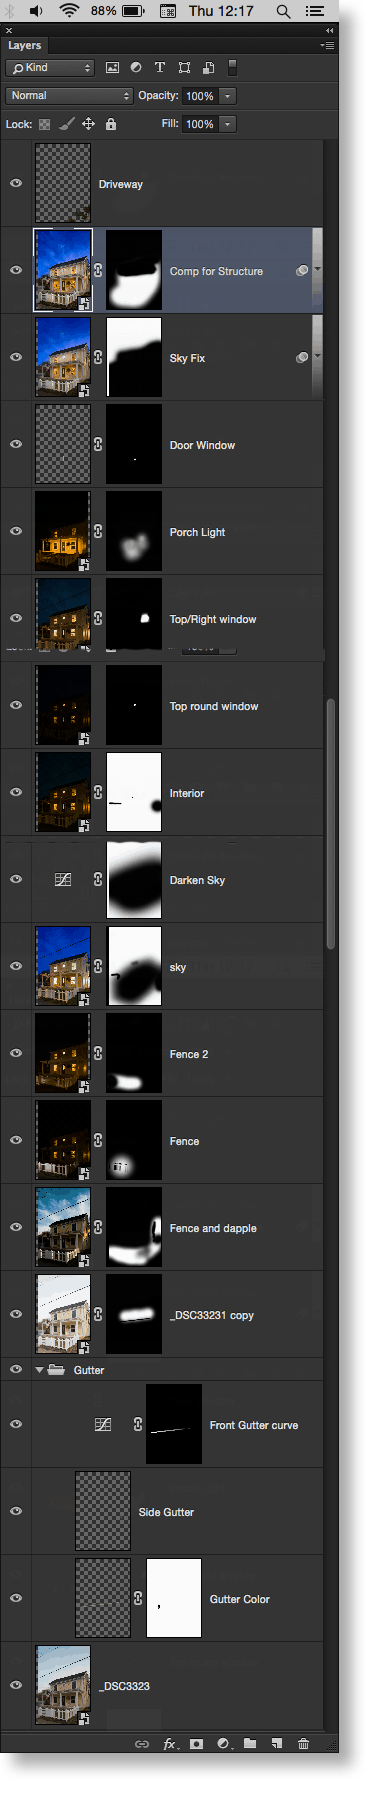 Graphic shows a Photoshop Layer palette with many image layers.